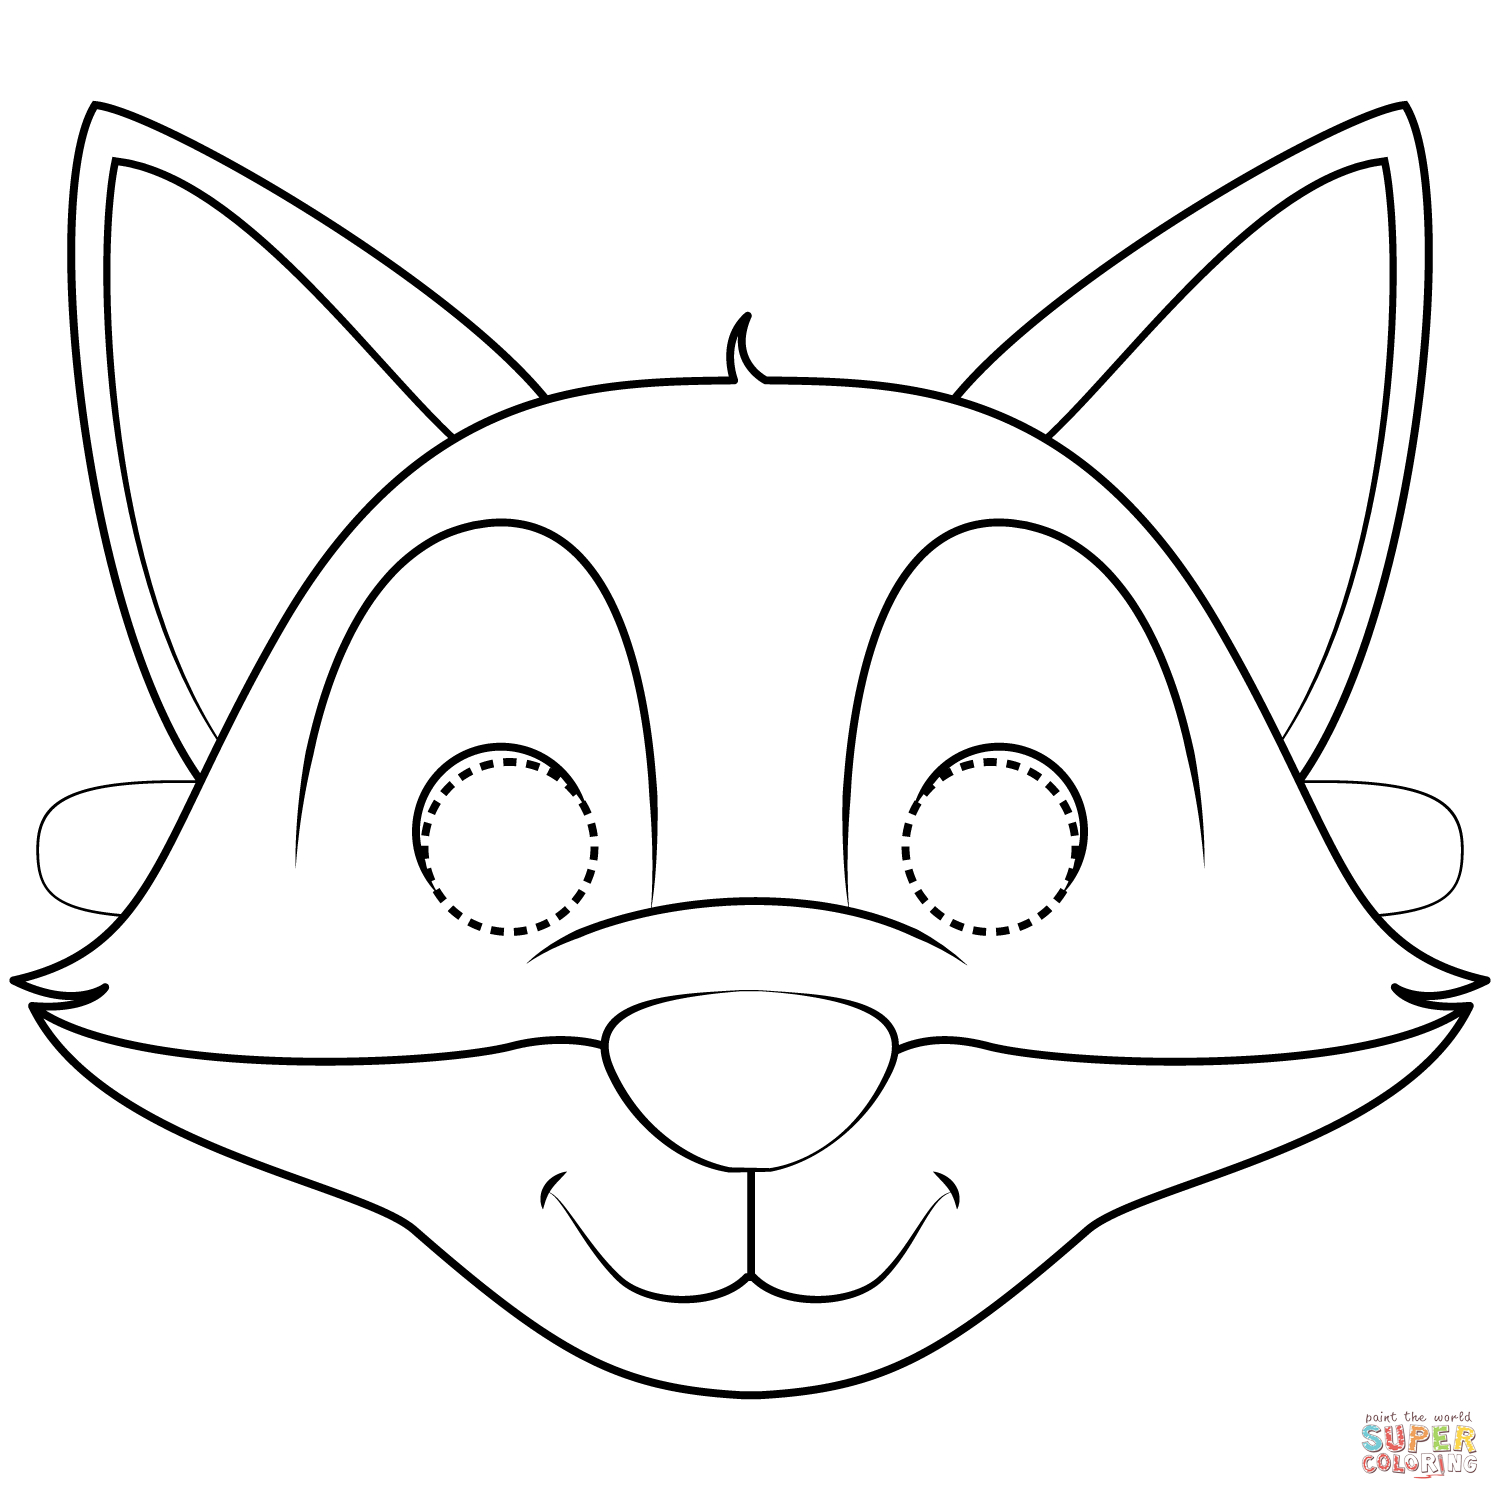 Fox Mask Coloring Page | Free Printable Coloring Pages - Free Printable Fox Mask Template